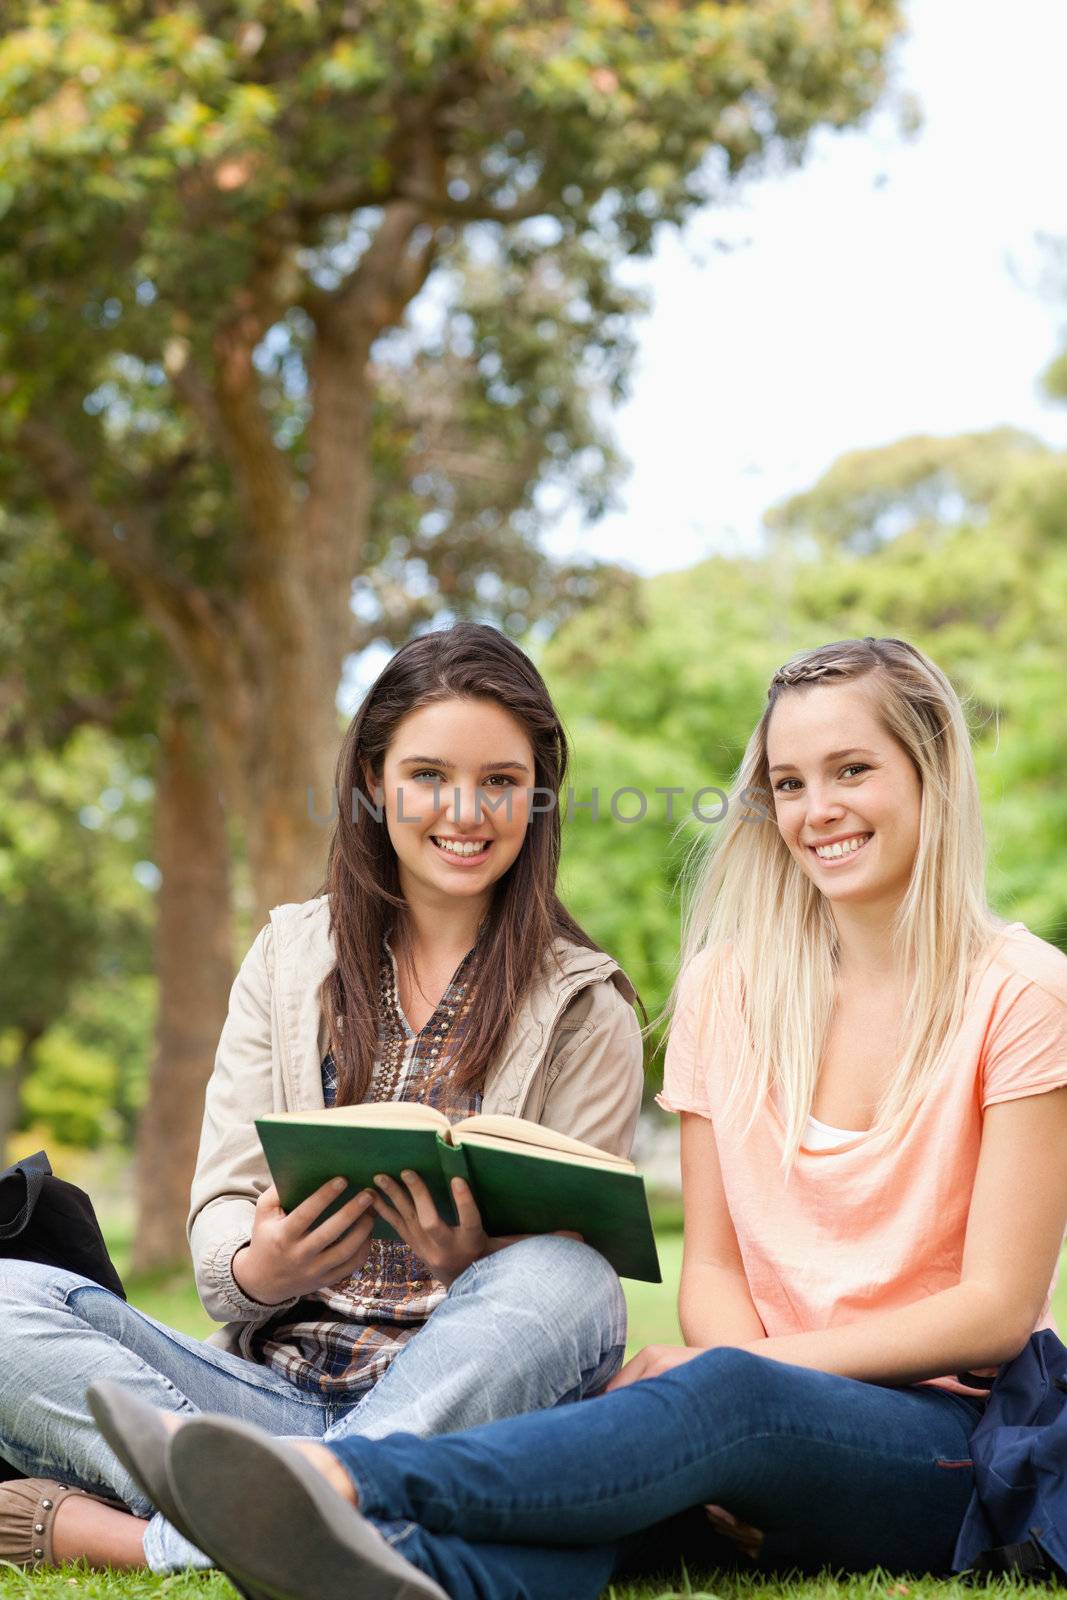 Cute teenagers sitting while studying with a textbook in a park